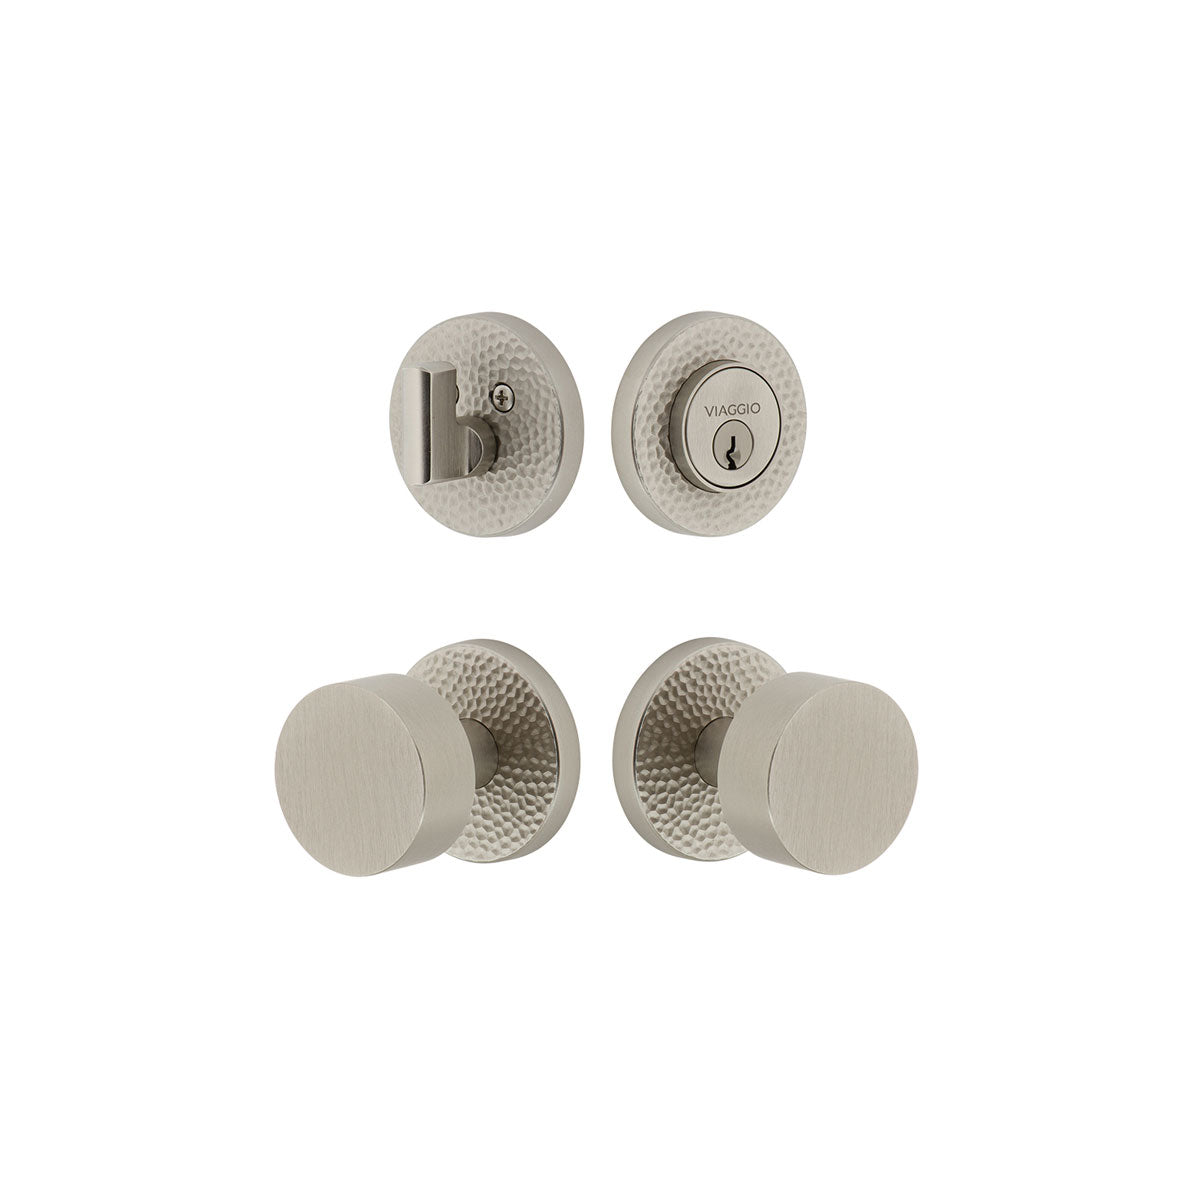 Circolo Hammered Rosette Entry Set with Circolo Knob in Satin Nickel